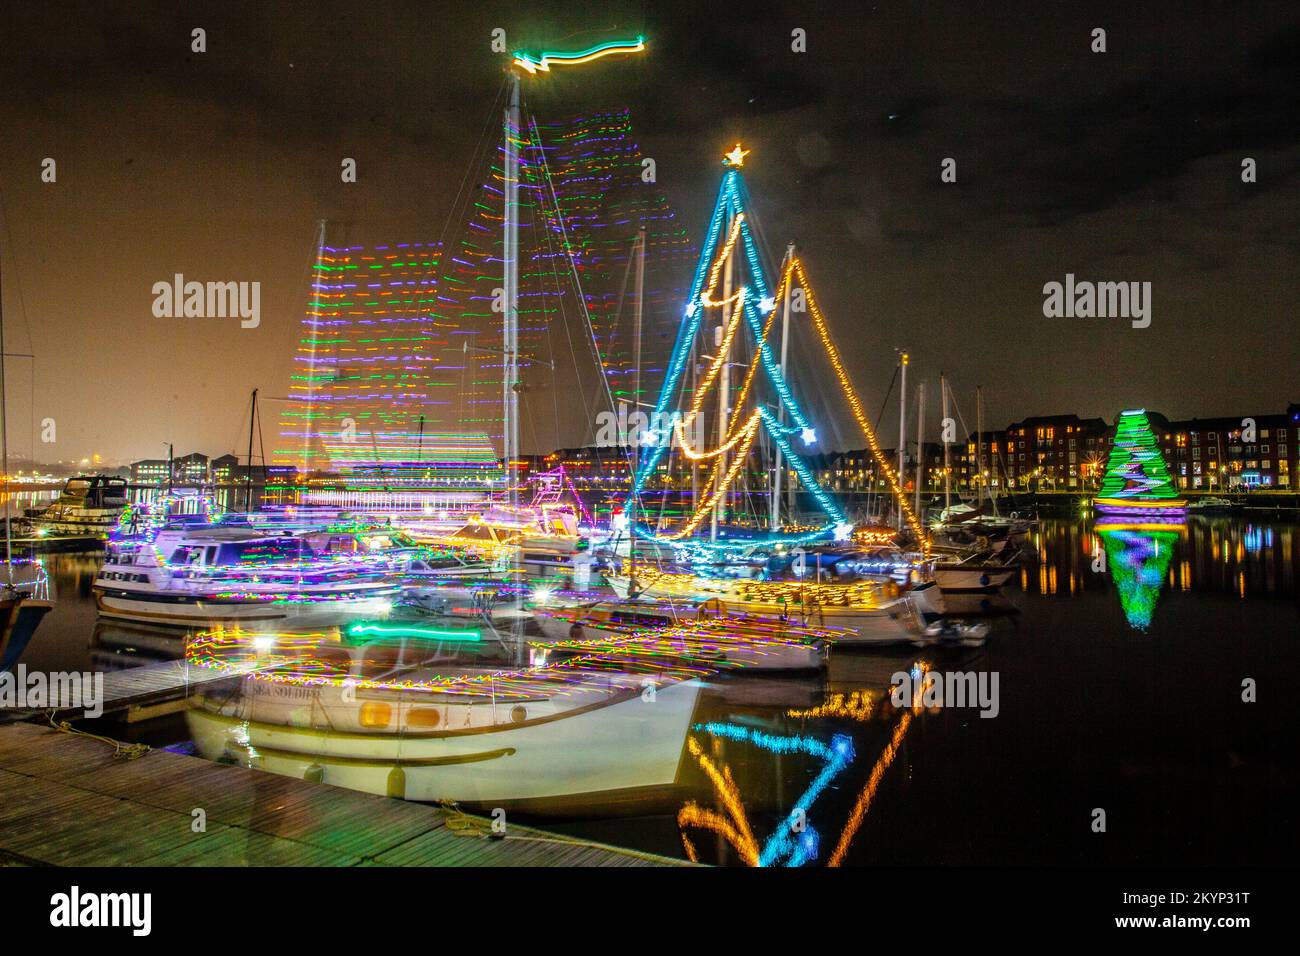 Christmas Lights at Sea. A Bright Holiday Boat Parade in Preston, Lancashire Dec 2022. Moored yachts and sailing boats decorated with sparkling Christmas lights in Preston Marina.  A Christmas night switch on for the crowds lining the dock wall as berth holders light up their boats and enjoy an evening sail under Festive Lights. Stock Photo